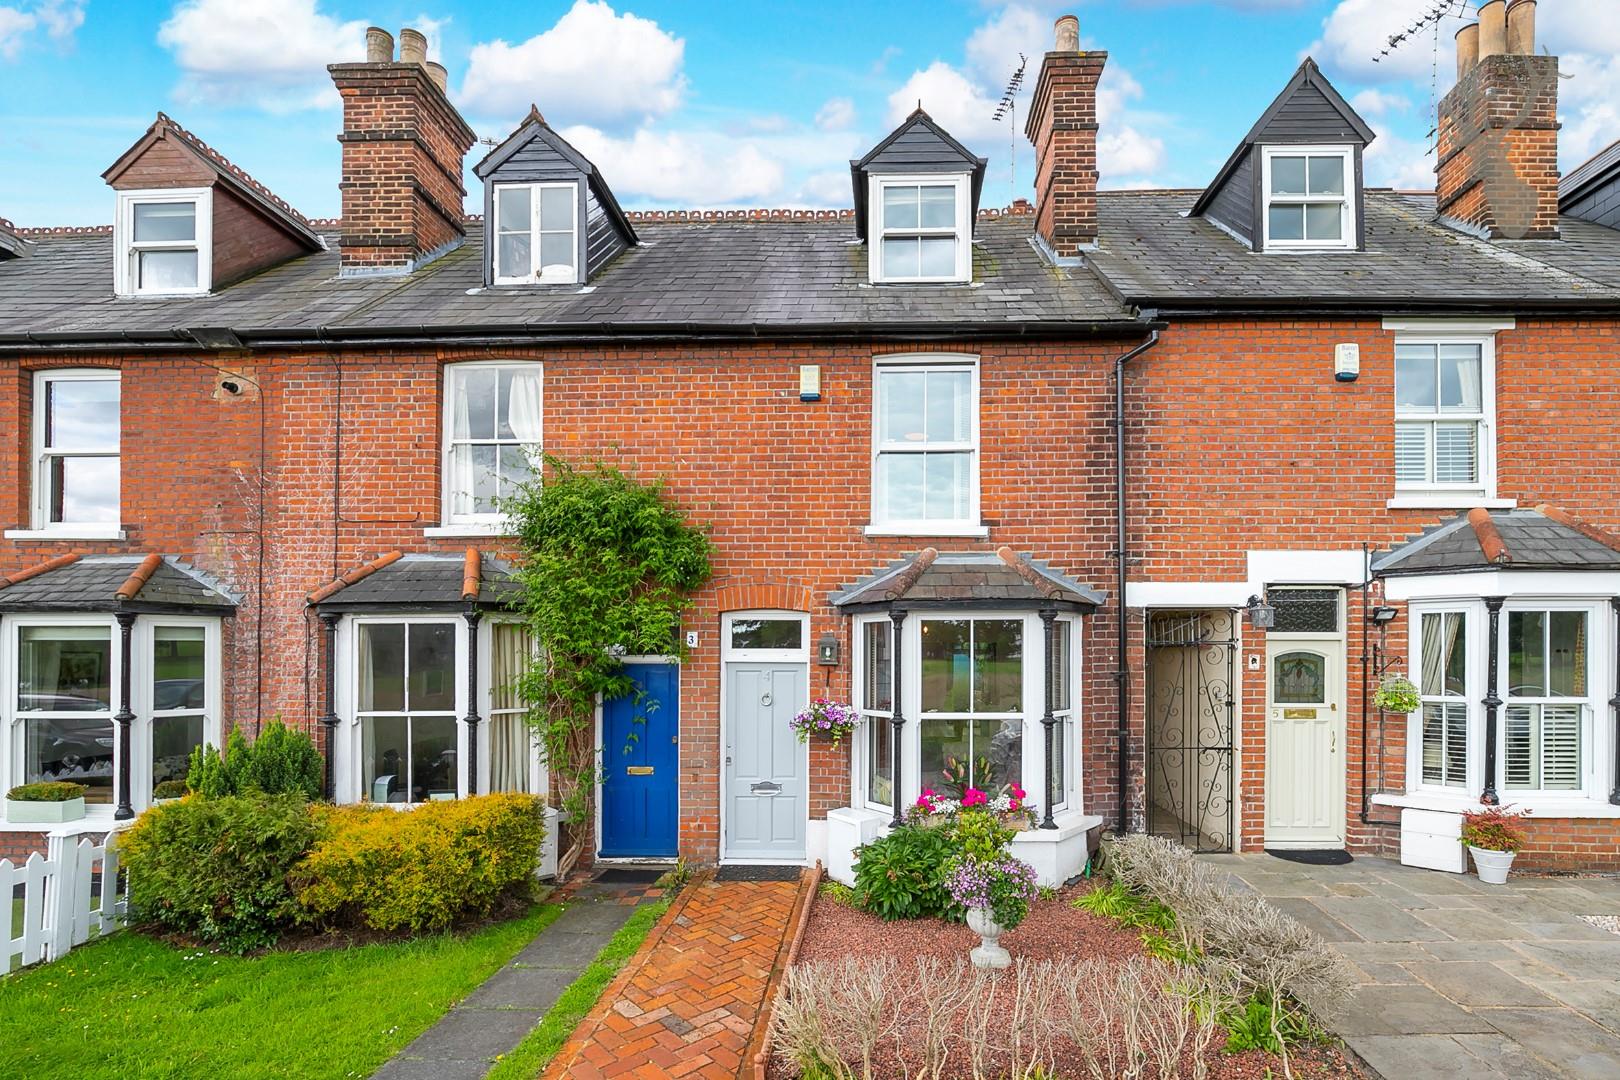 Similar Property: House - Terraced in Theydon Bois